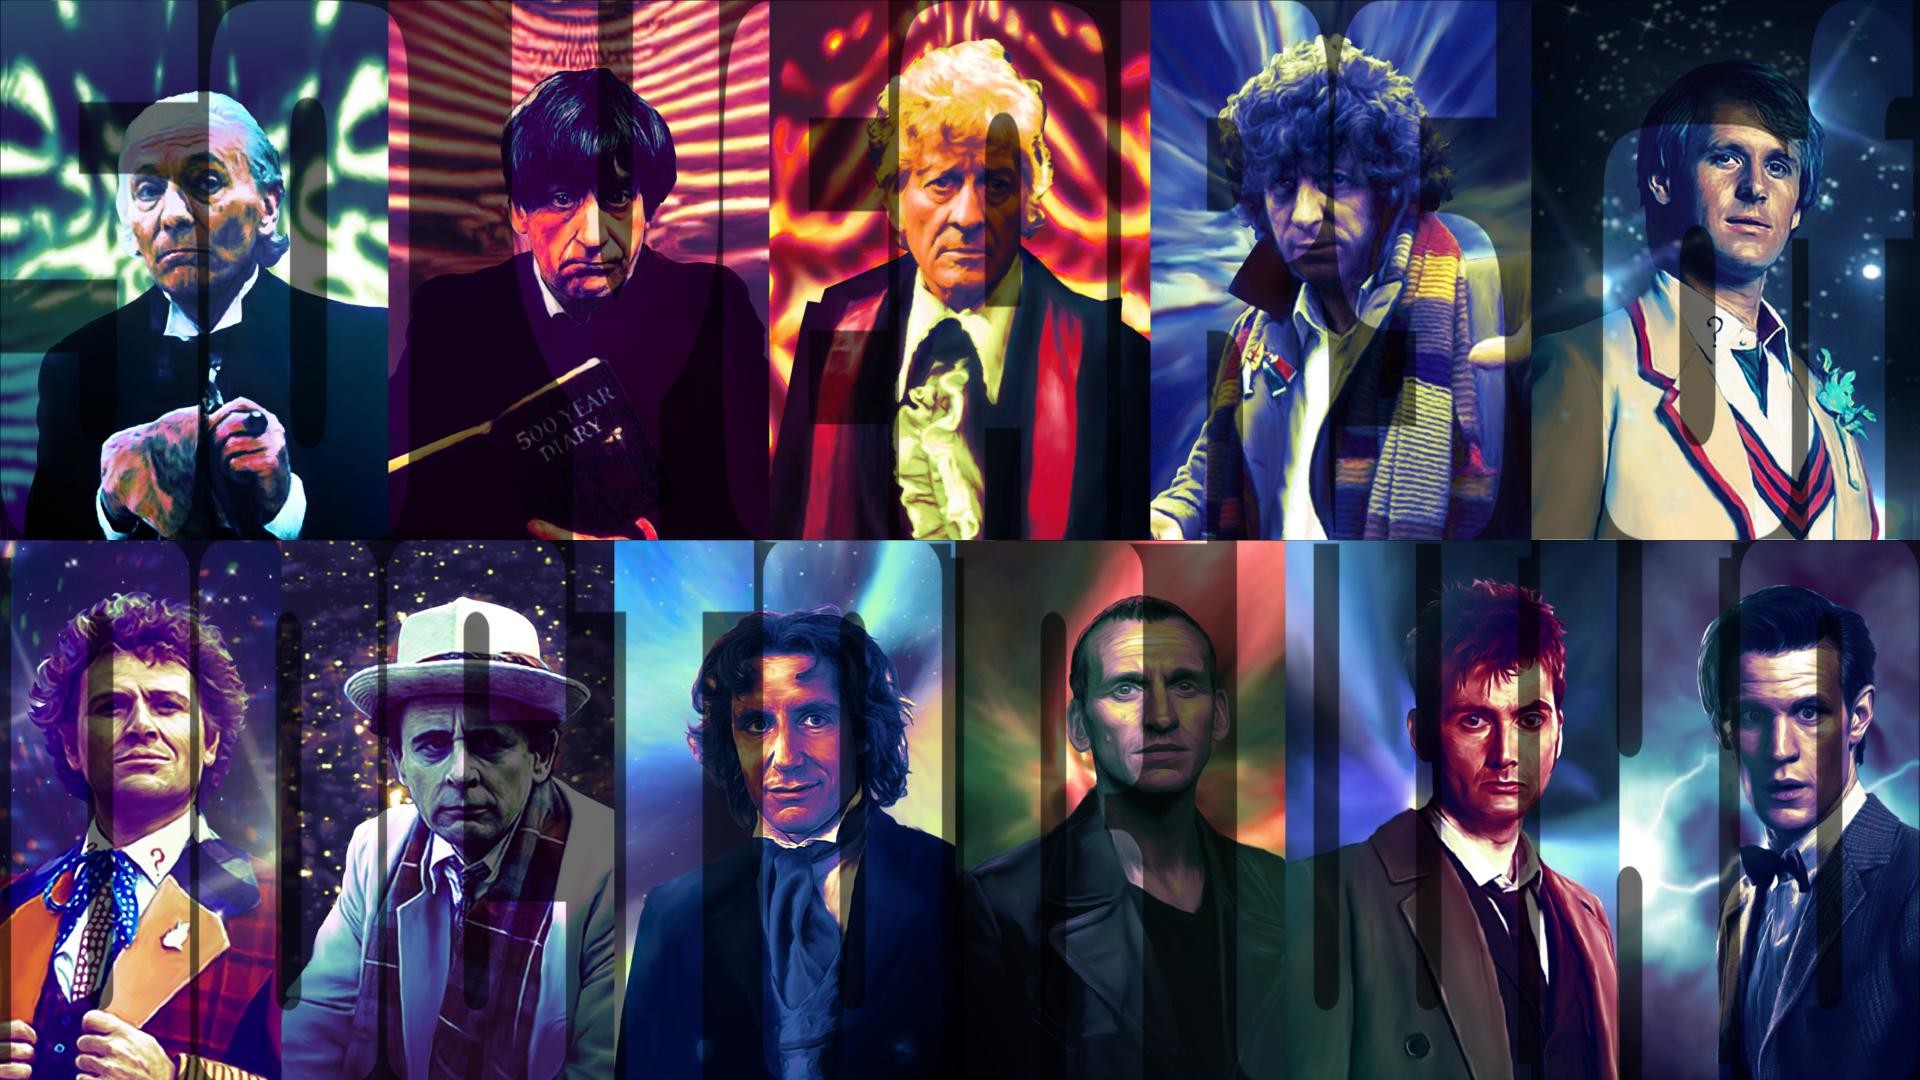 1920x1080 all character free doctor who wallpaper wallpaper desktop images background  photos download hd windows wallpaper samsung iphone 1920Ã1080 Wallpaper HD